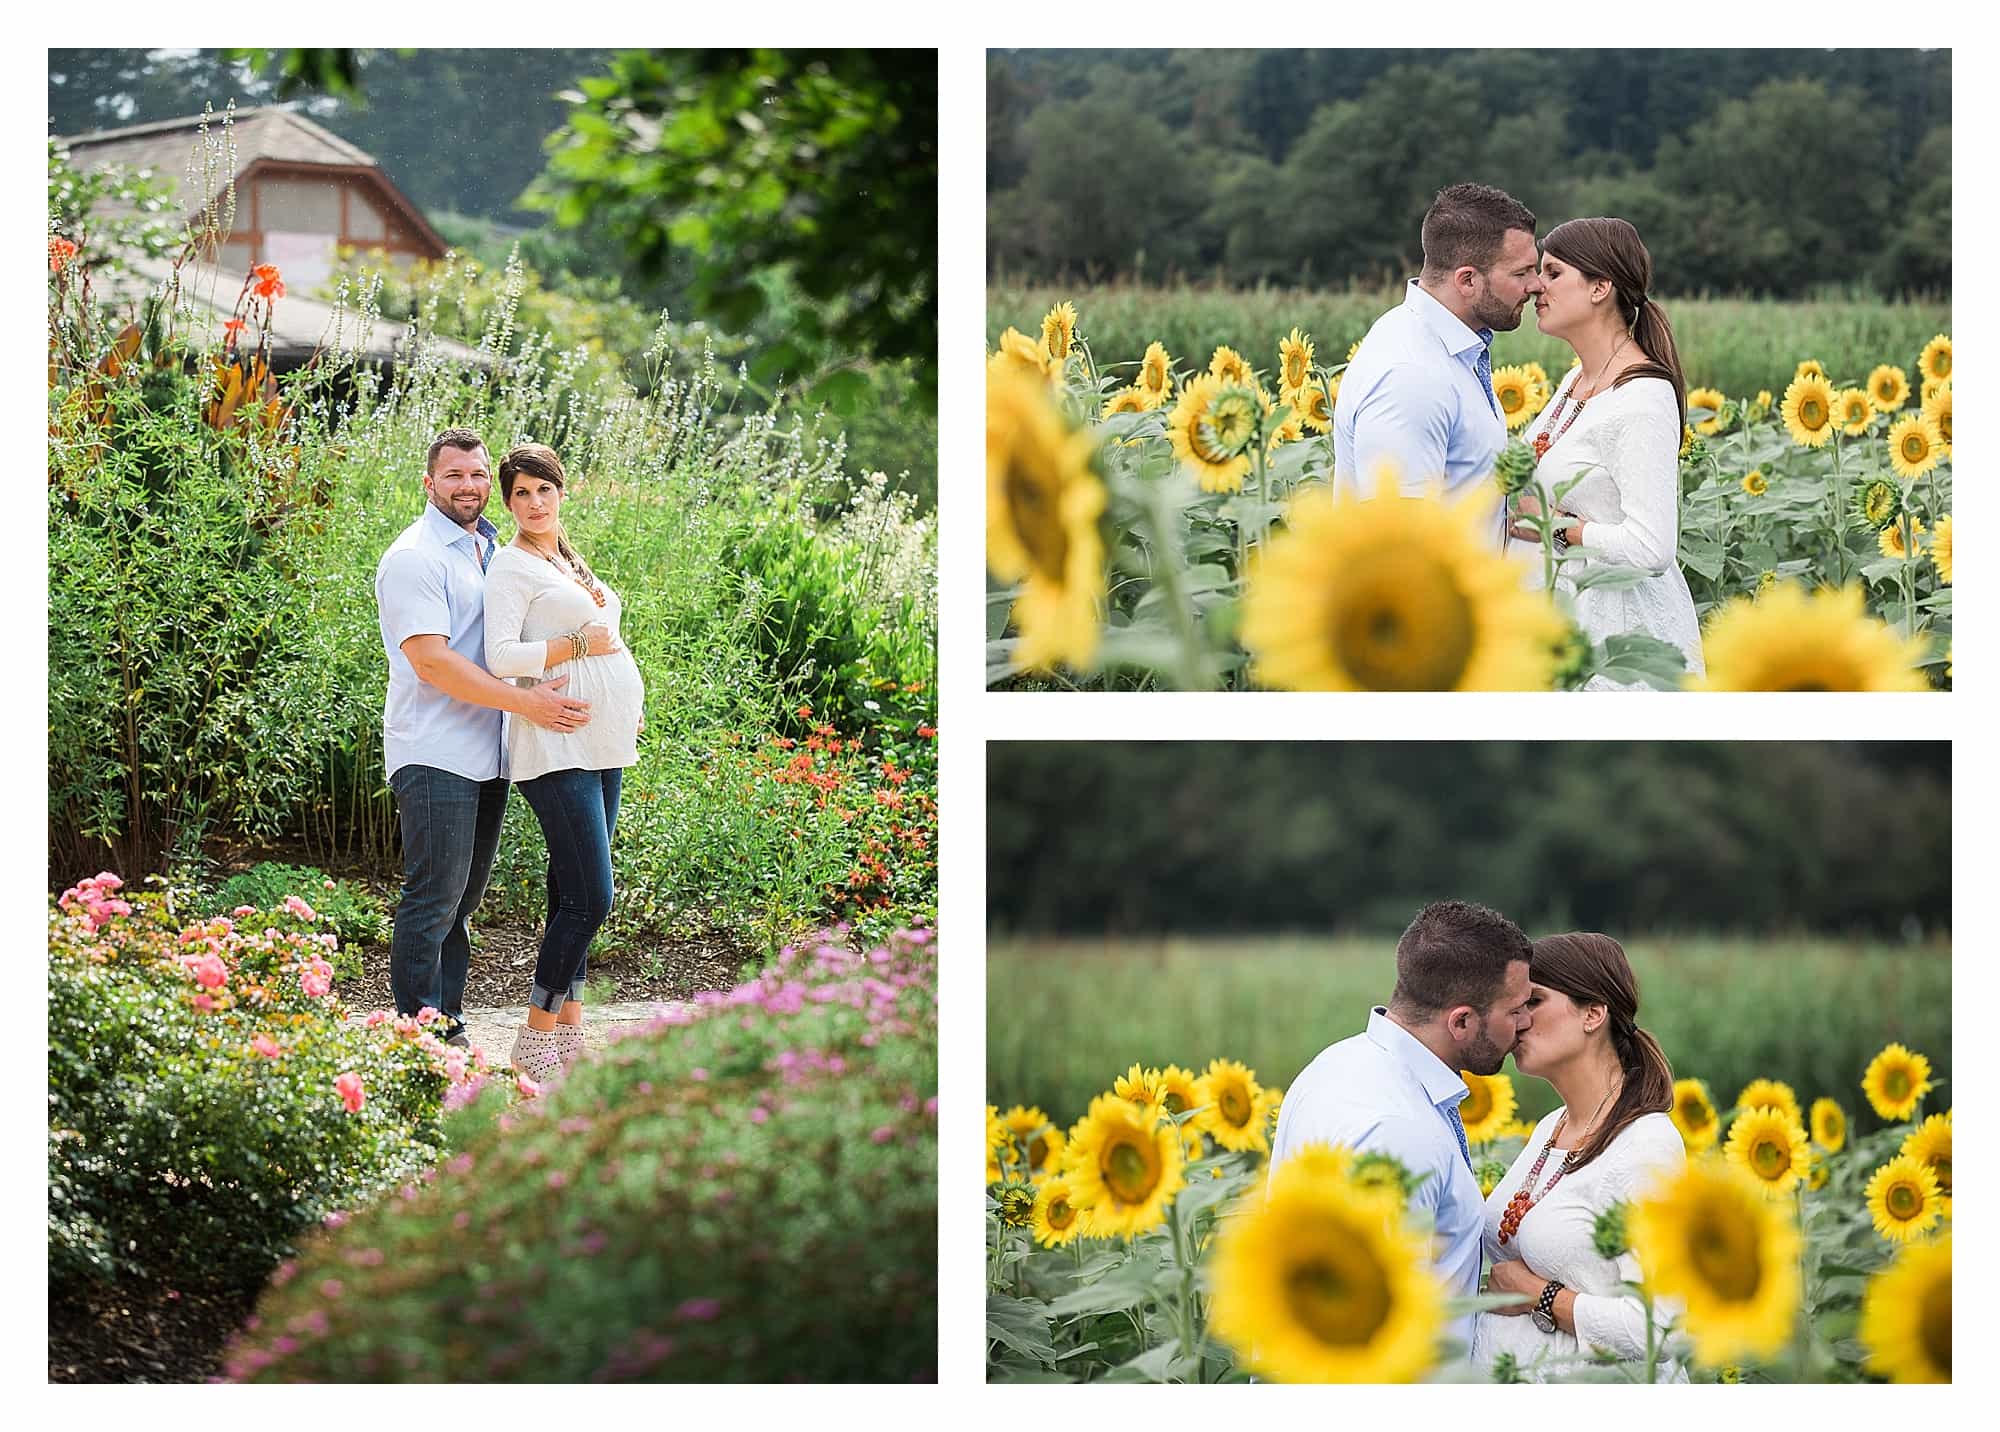 Maternity pictures at Biltmore House in Sunflowers